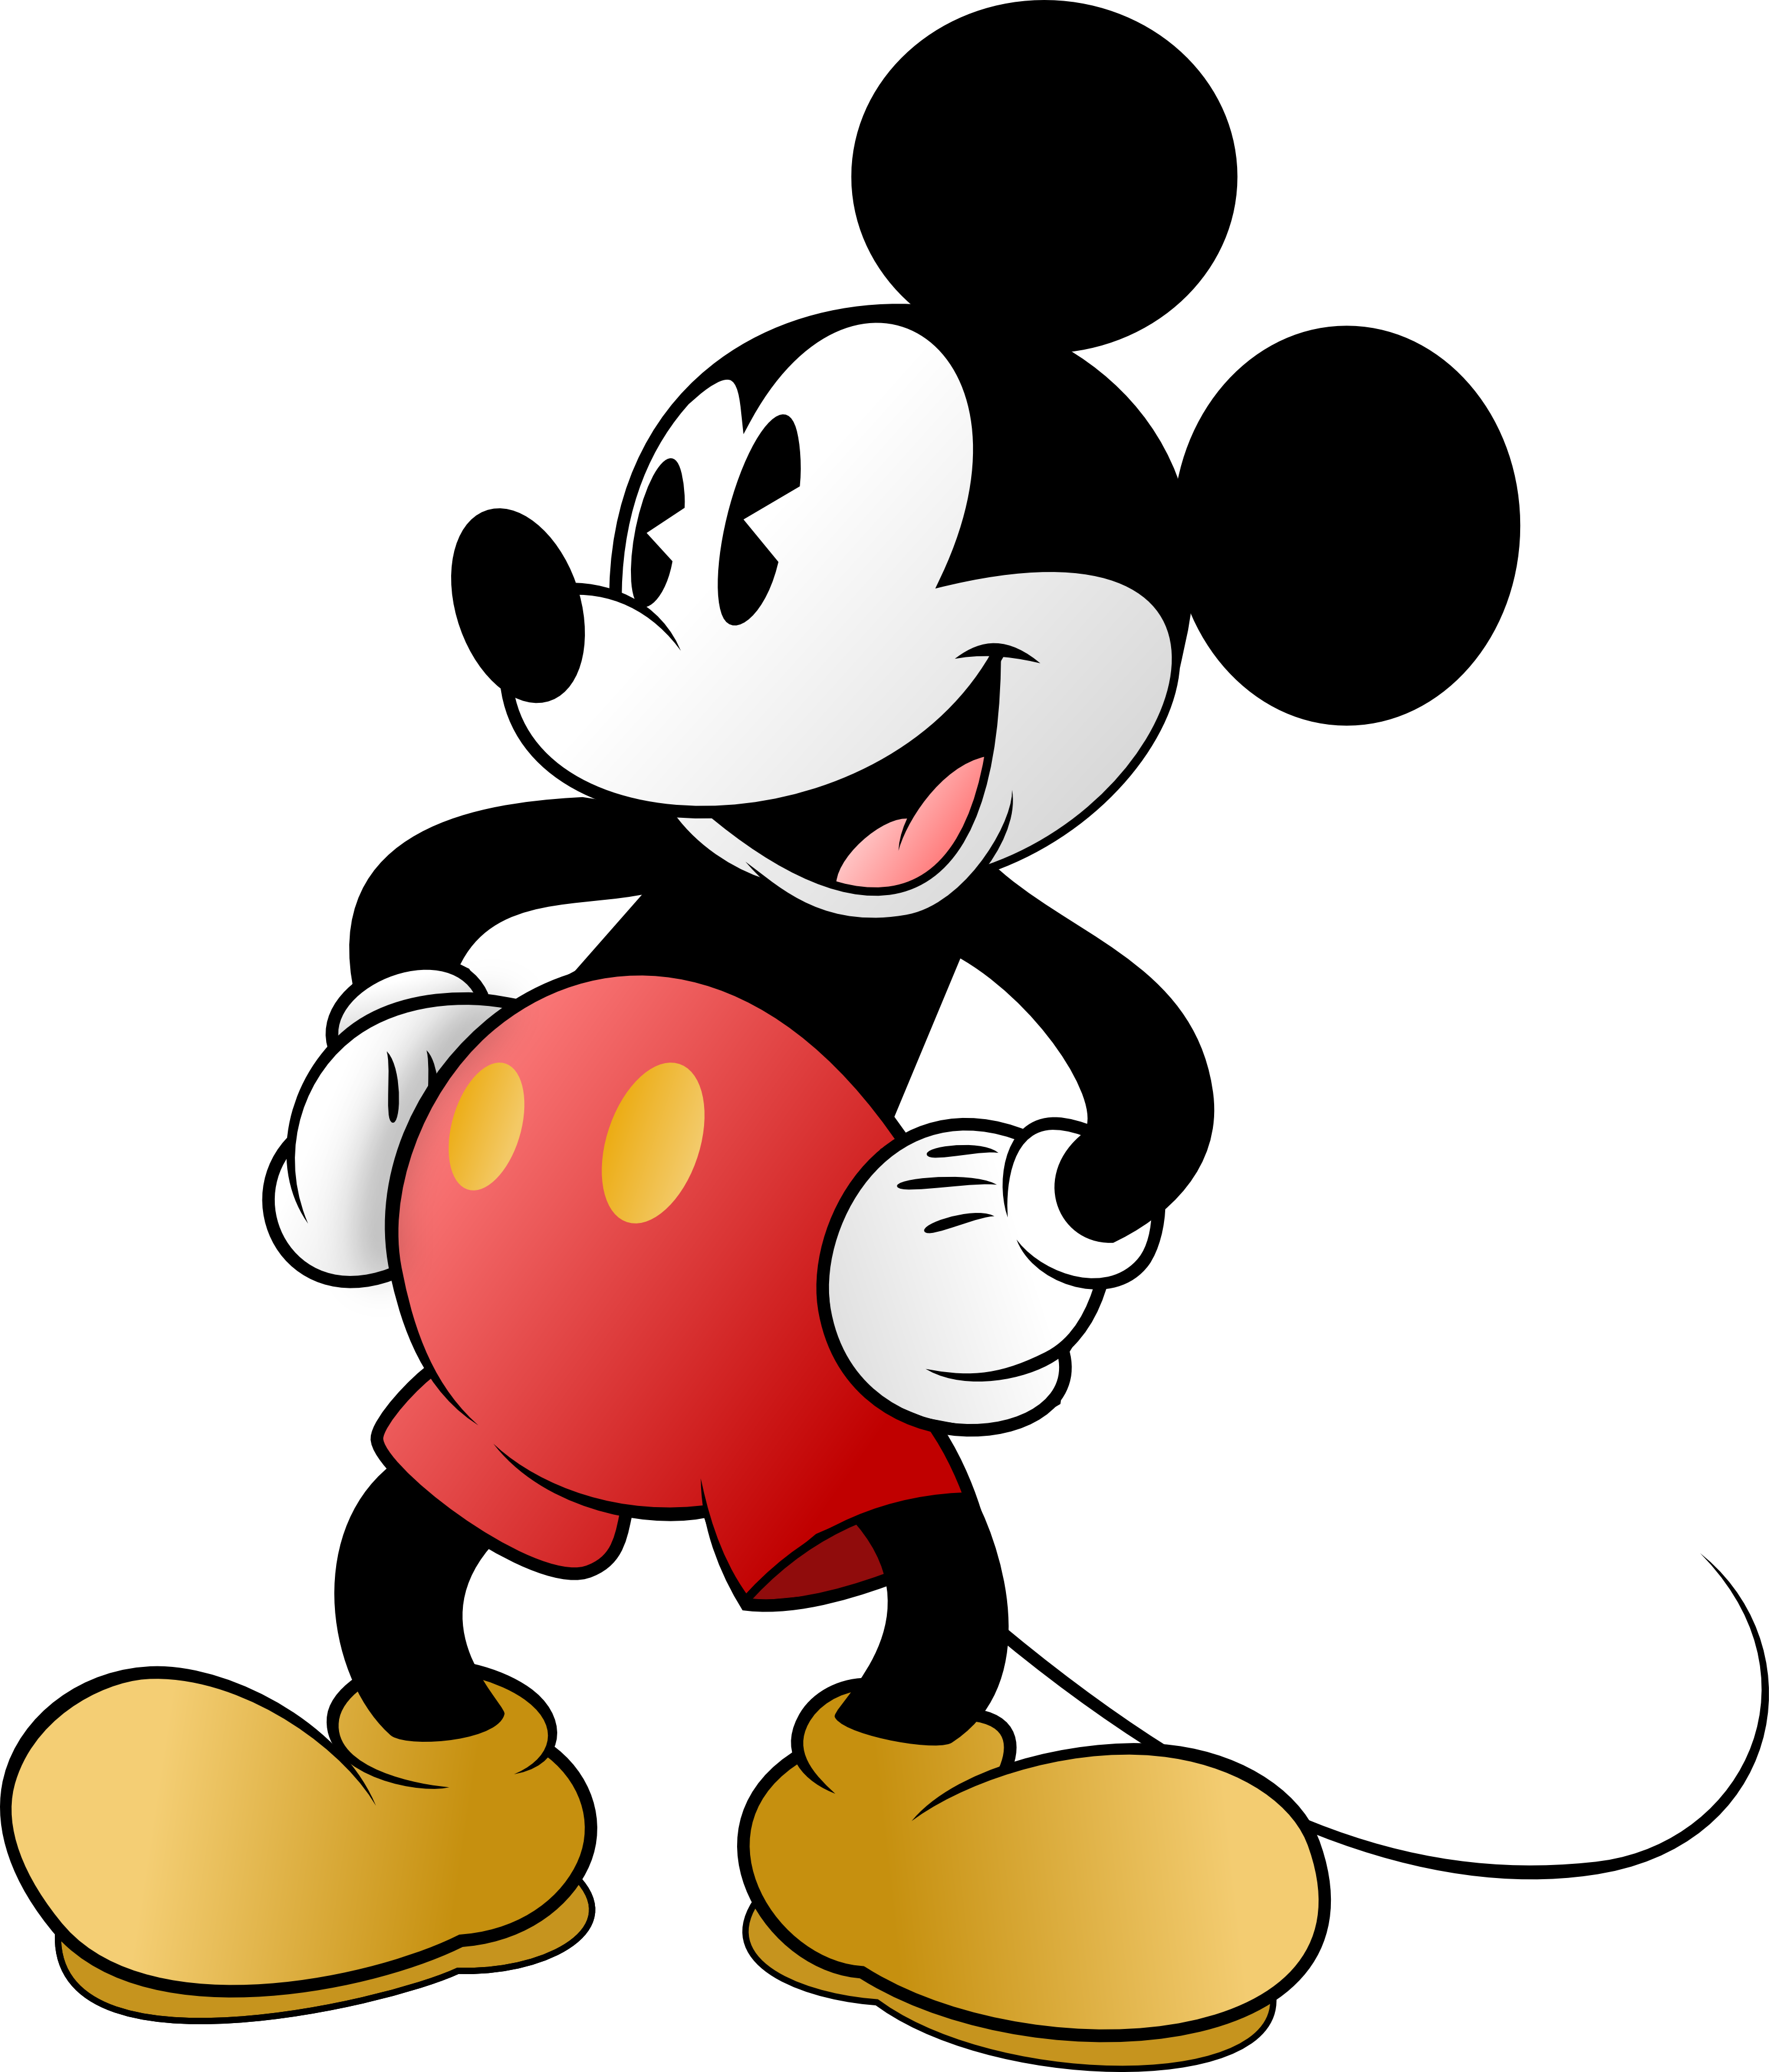 Download Mickey Mouse Hd PNG Image for Free